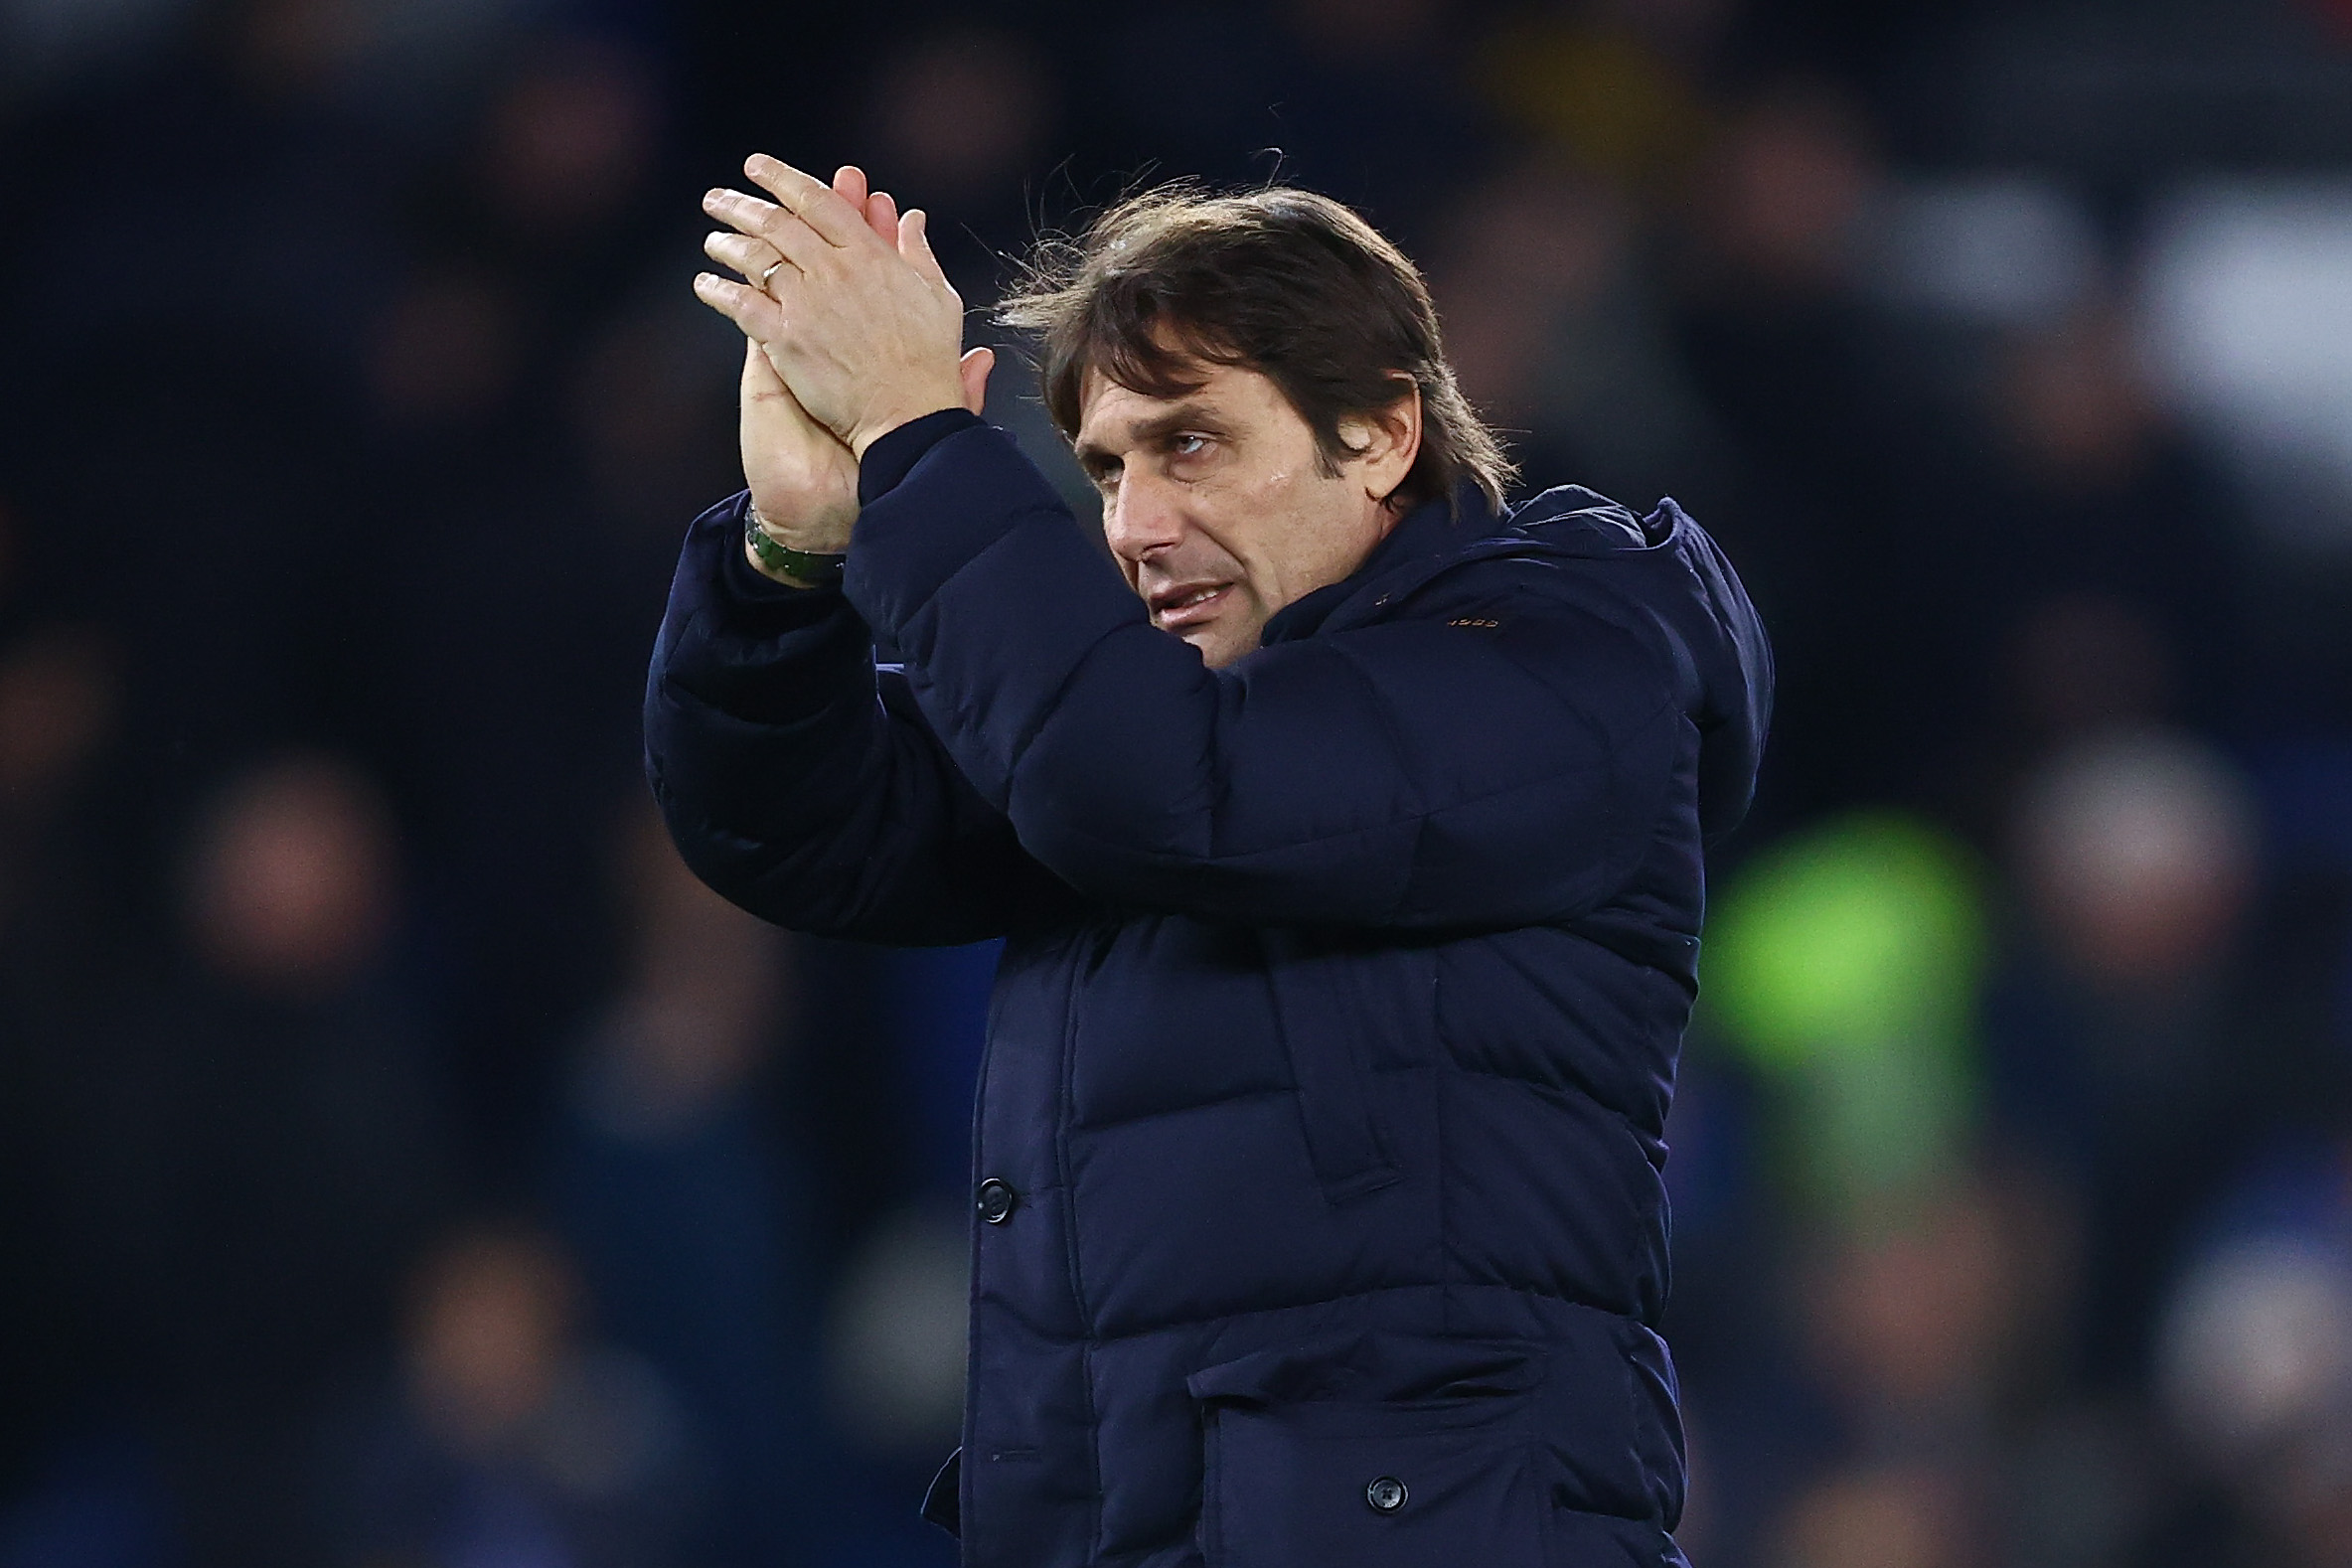 Antonio Conte believes Tottenham Hotspur's squad depth will be tested from next week.